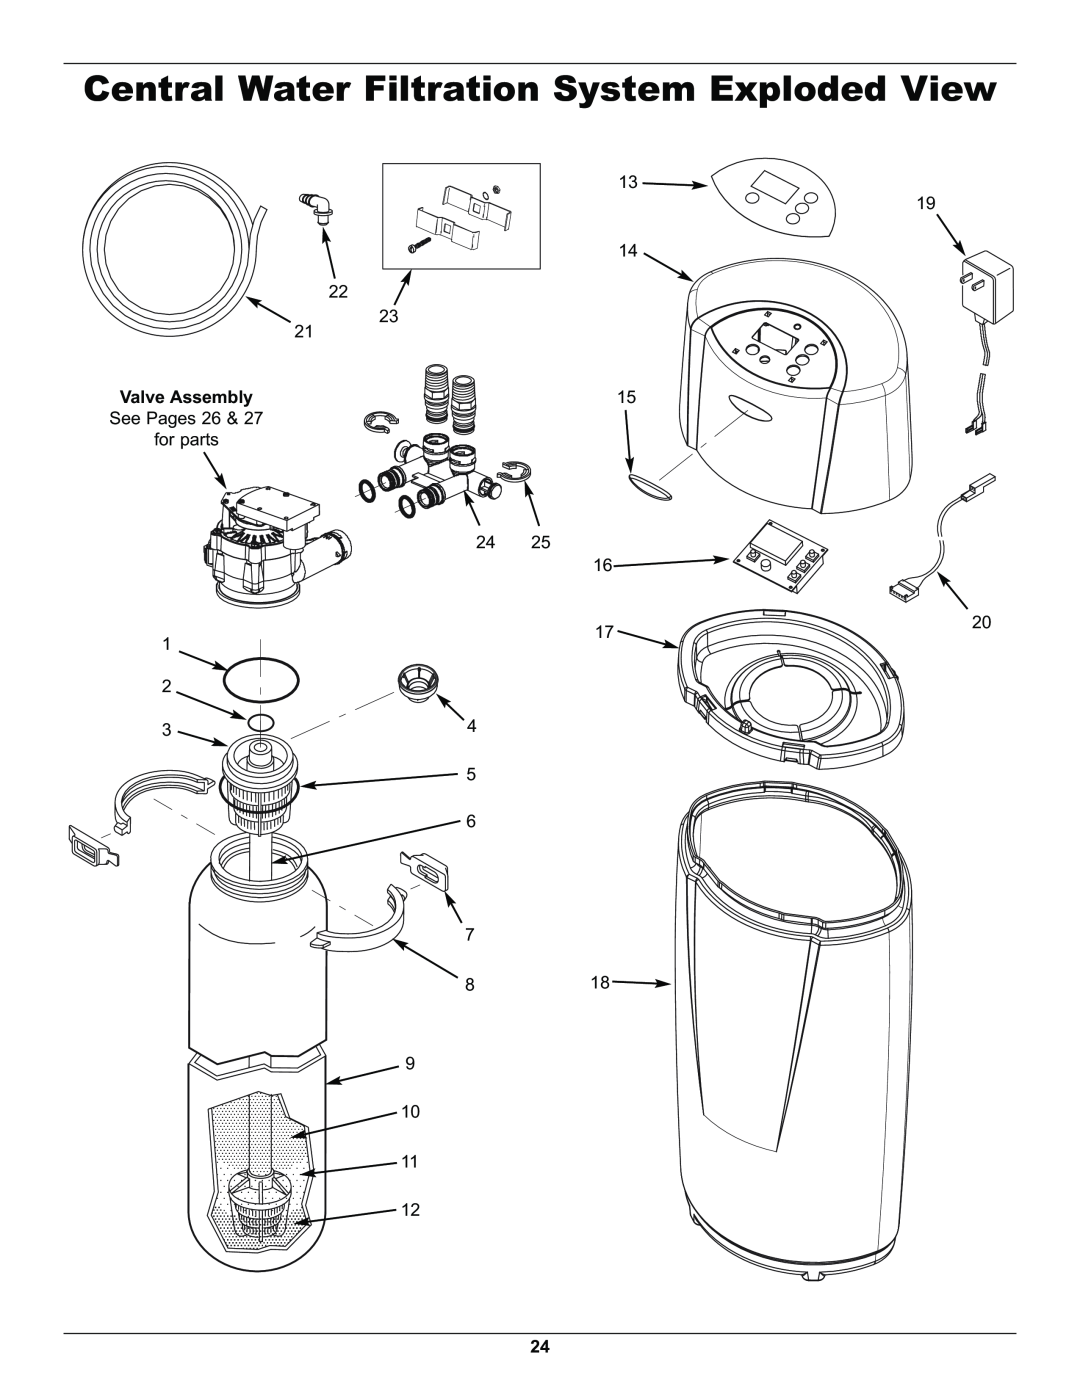 Whirlpool WHELJ1 manual Central Water Filtration System Exploded View, Valve Assembly 